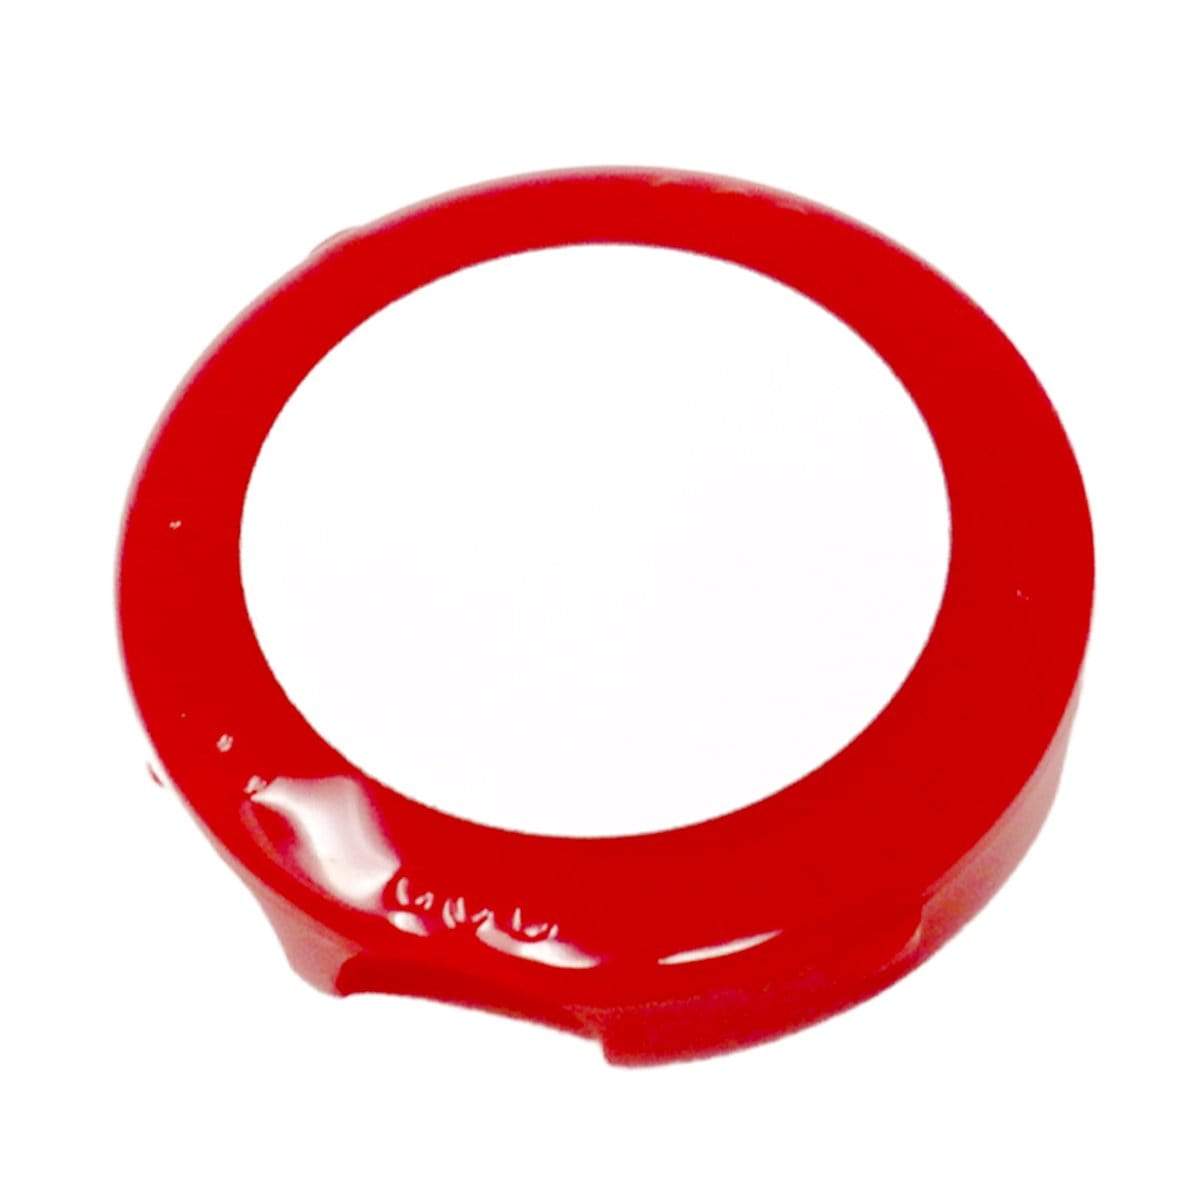 Red Antimicrobial Stethoscope ID Tag - Customizable Label & Adjustable Tube Size to Fit Most Stehs ST99-RED